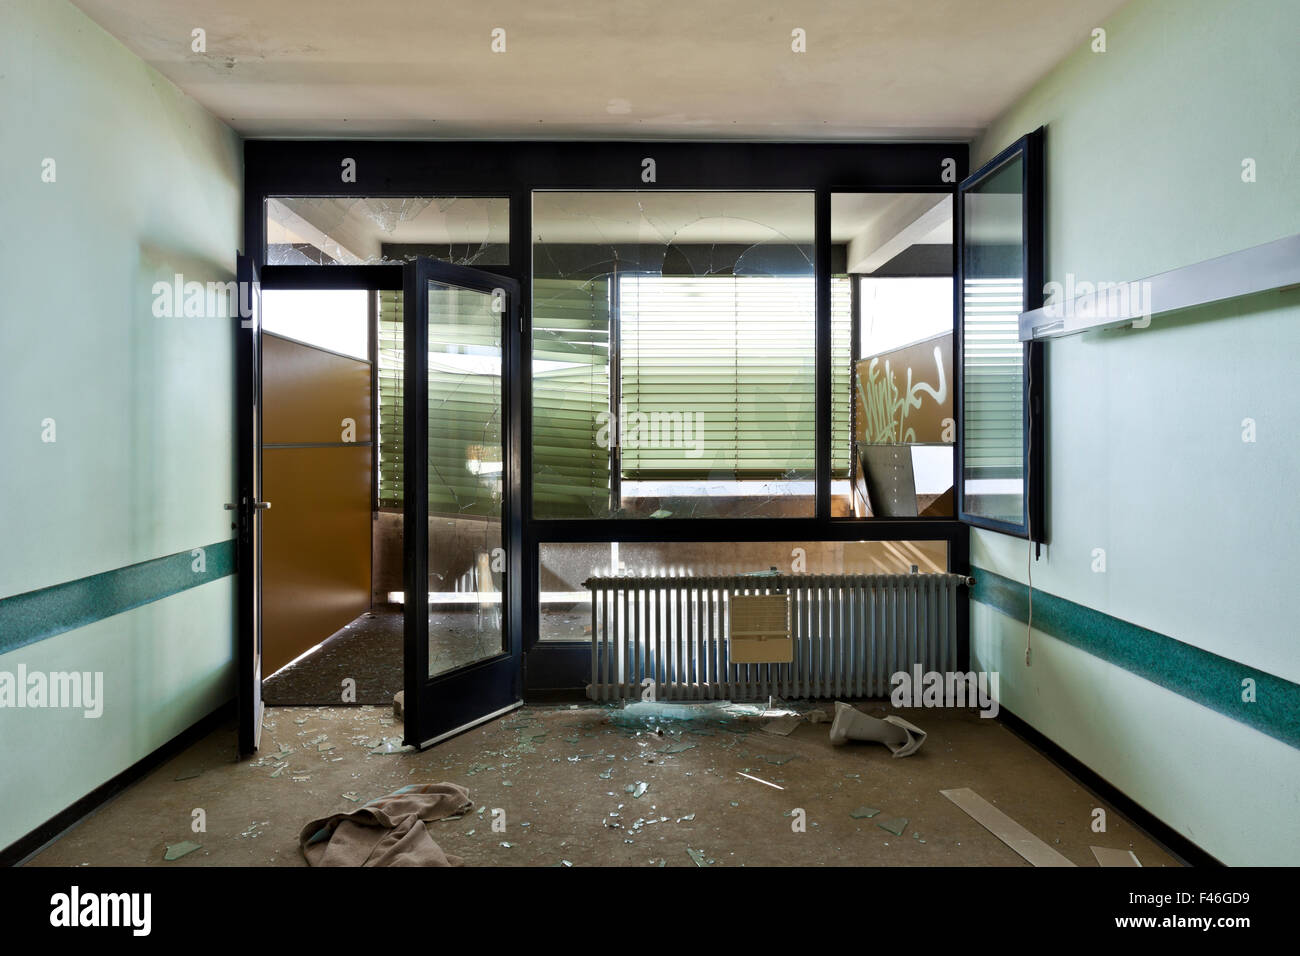 abandoned building, office destroyed Stock Photo